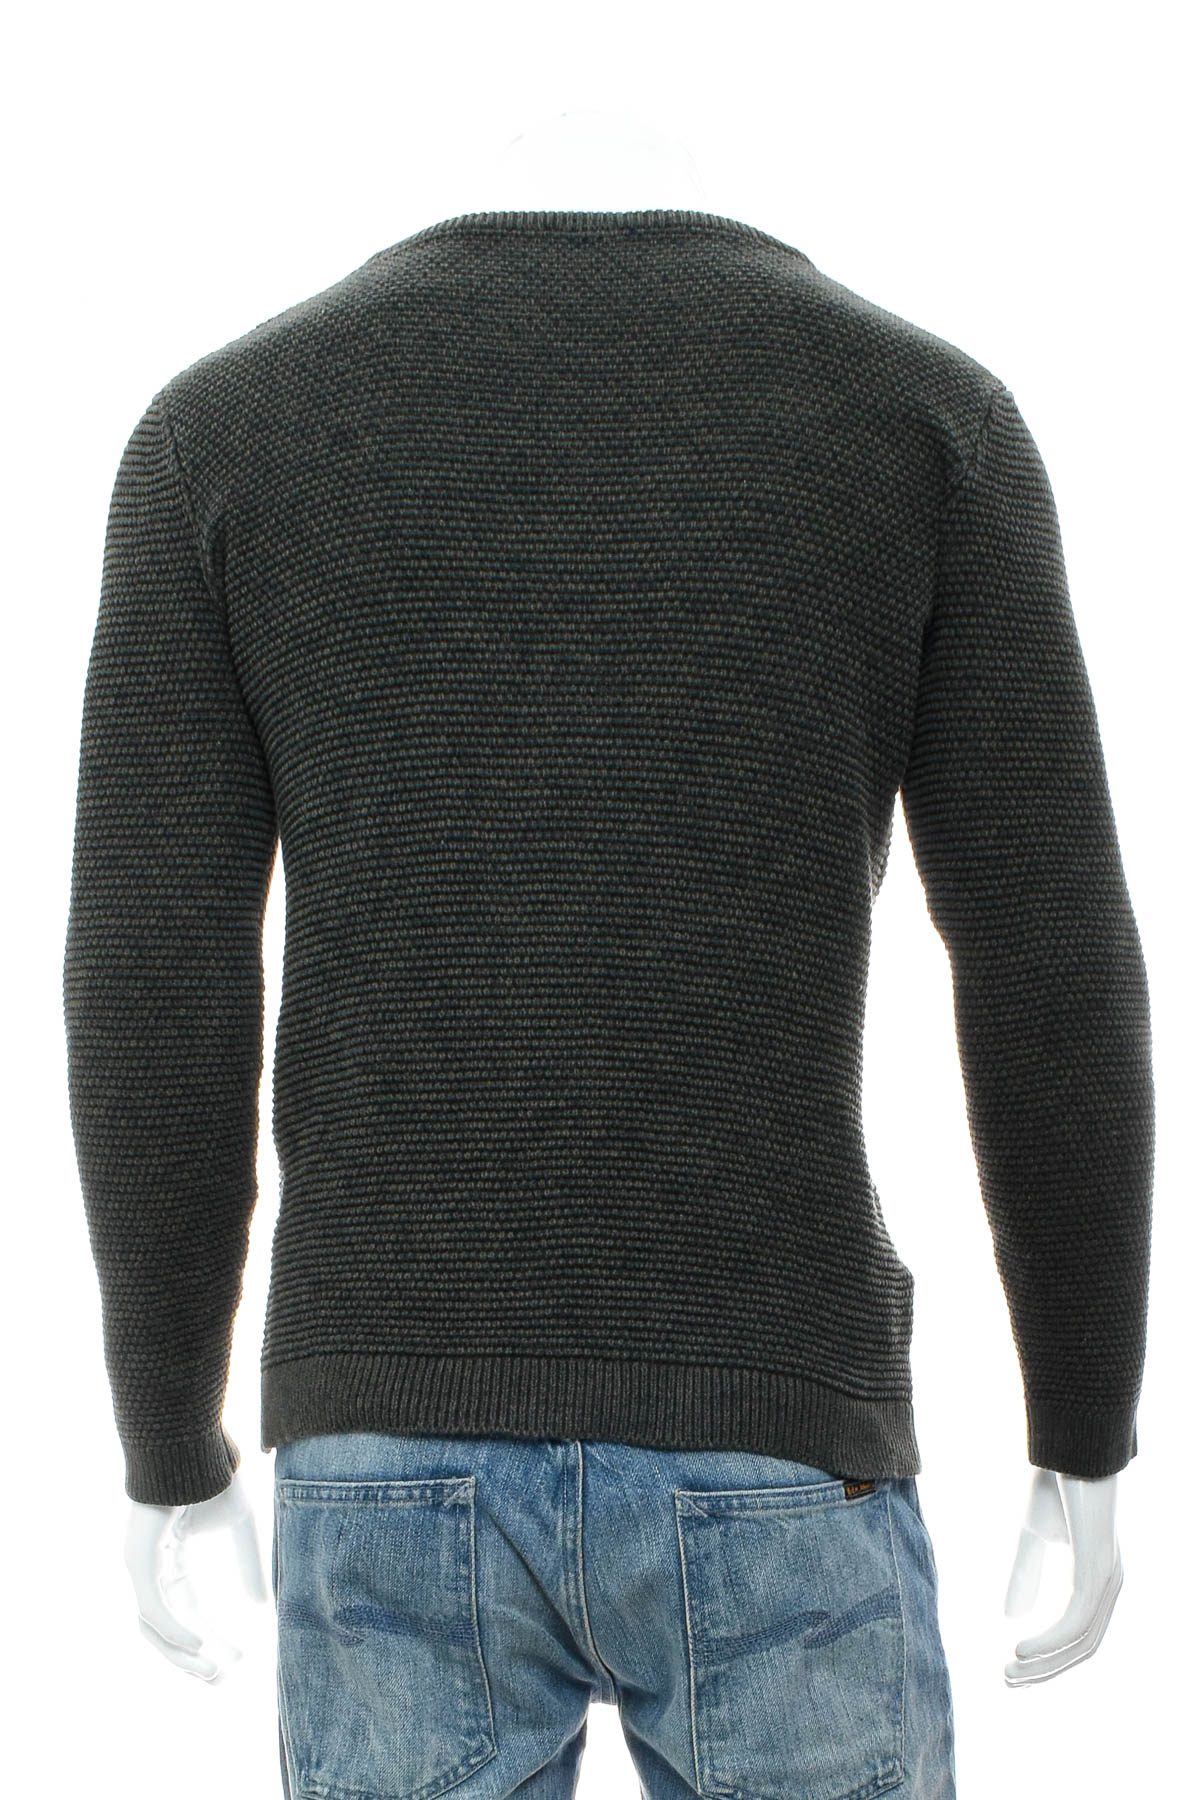 Men's sweater - SELECTED / HOMME - 1